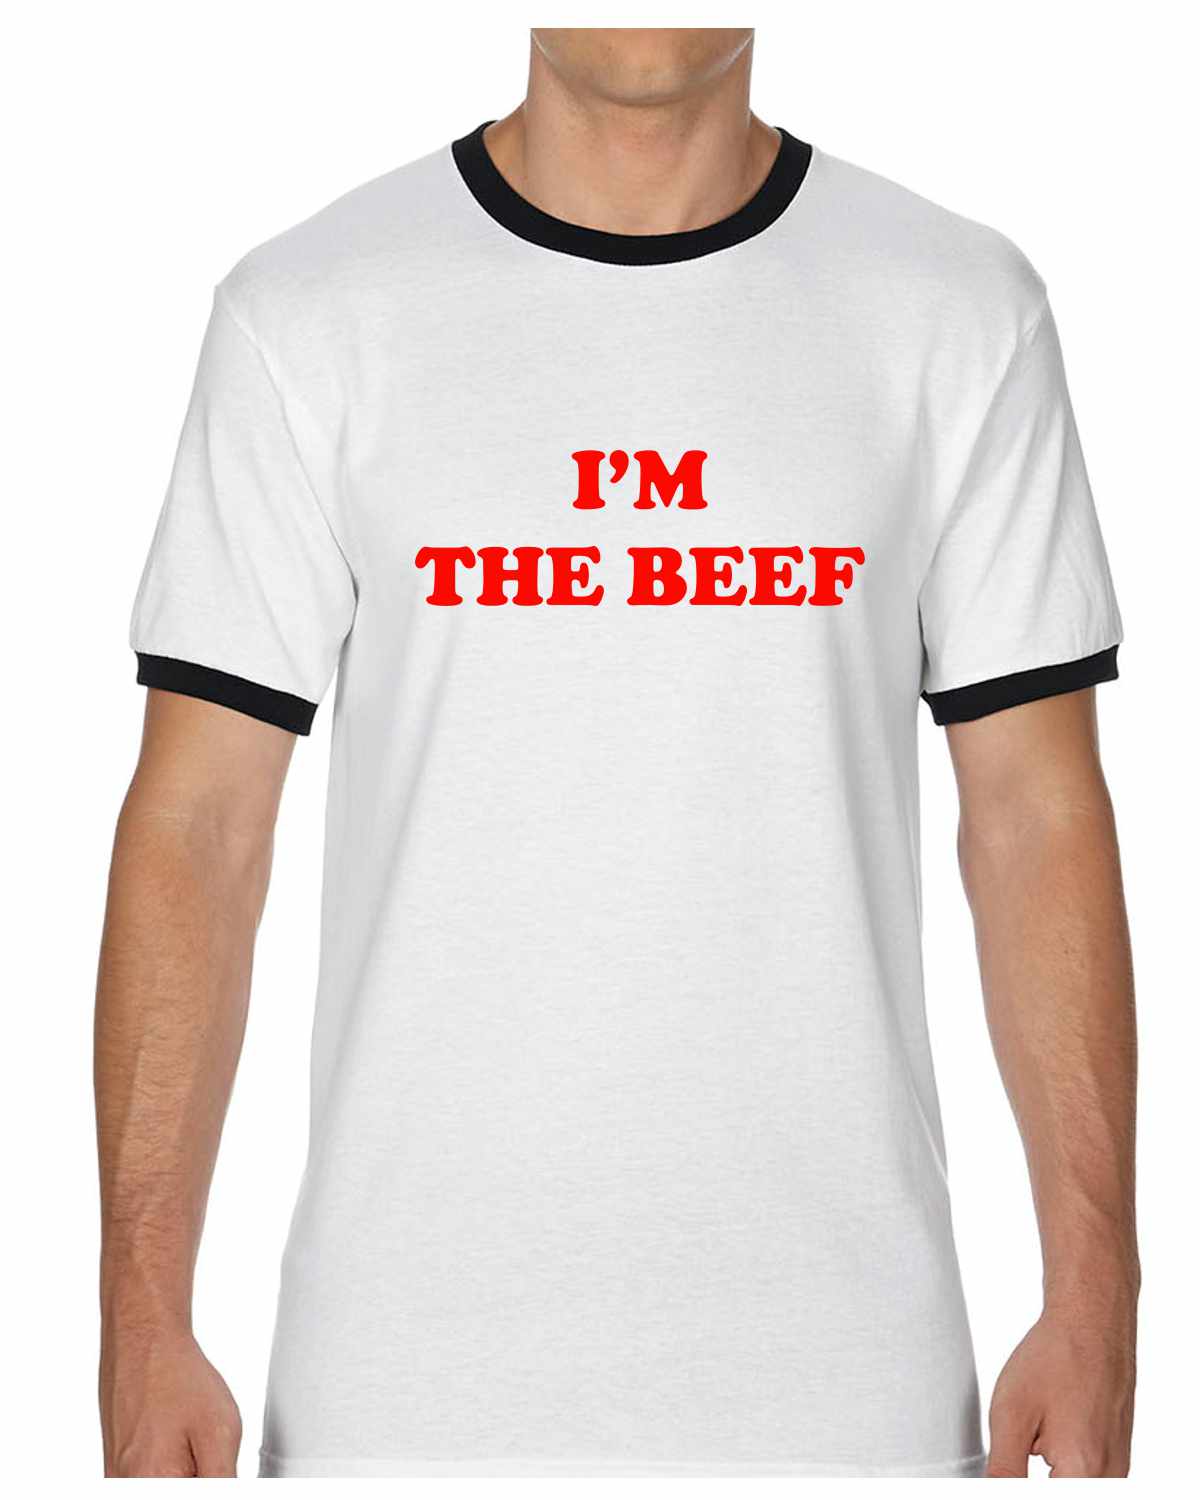 I'm The Beef Ringer Tee (#1060-8)